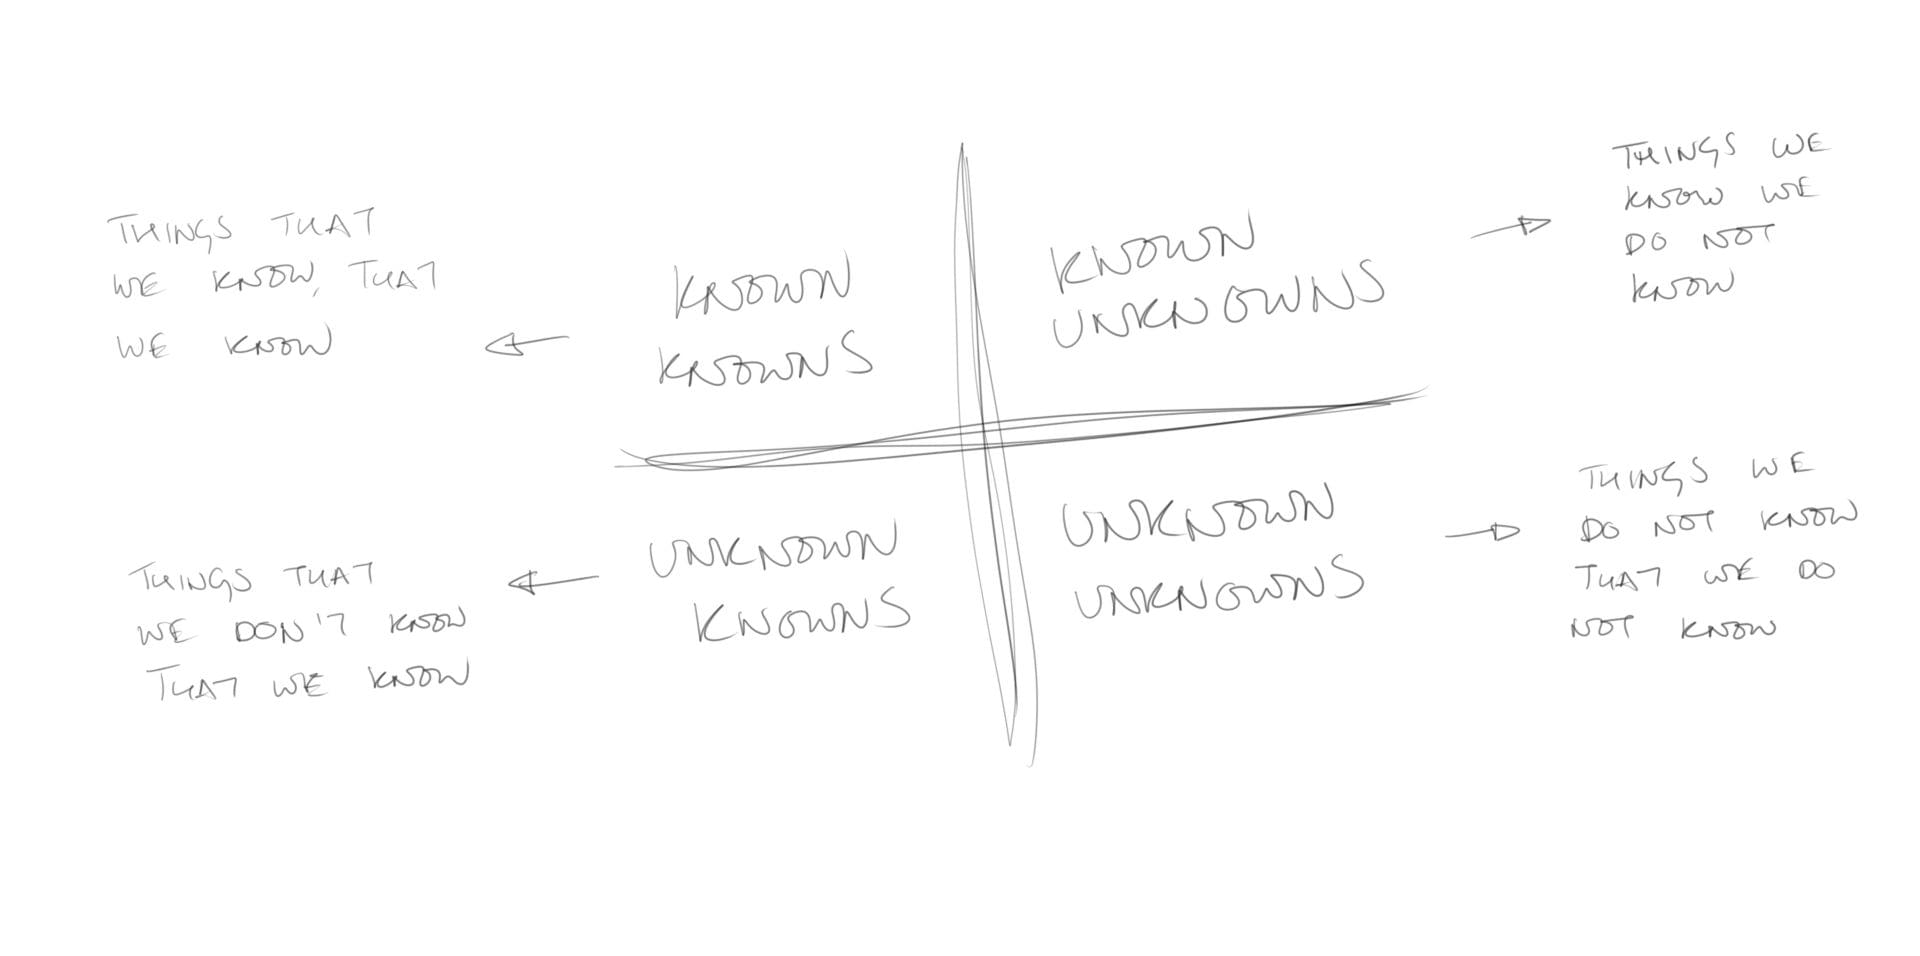 Four quadrants indicating known knowns, known unknowns, unknown knowns, and unknown unknowns